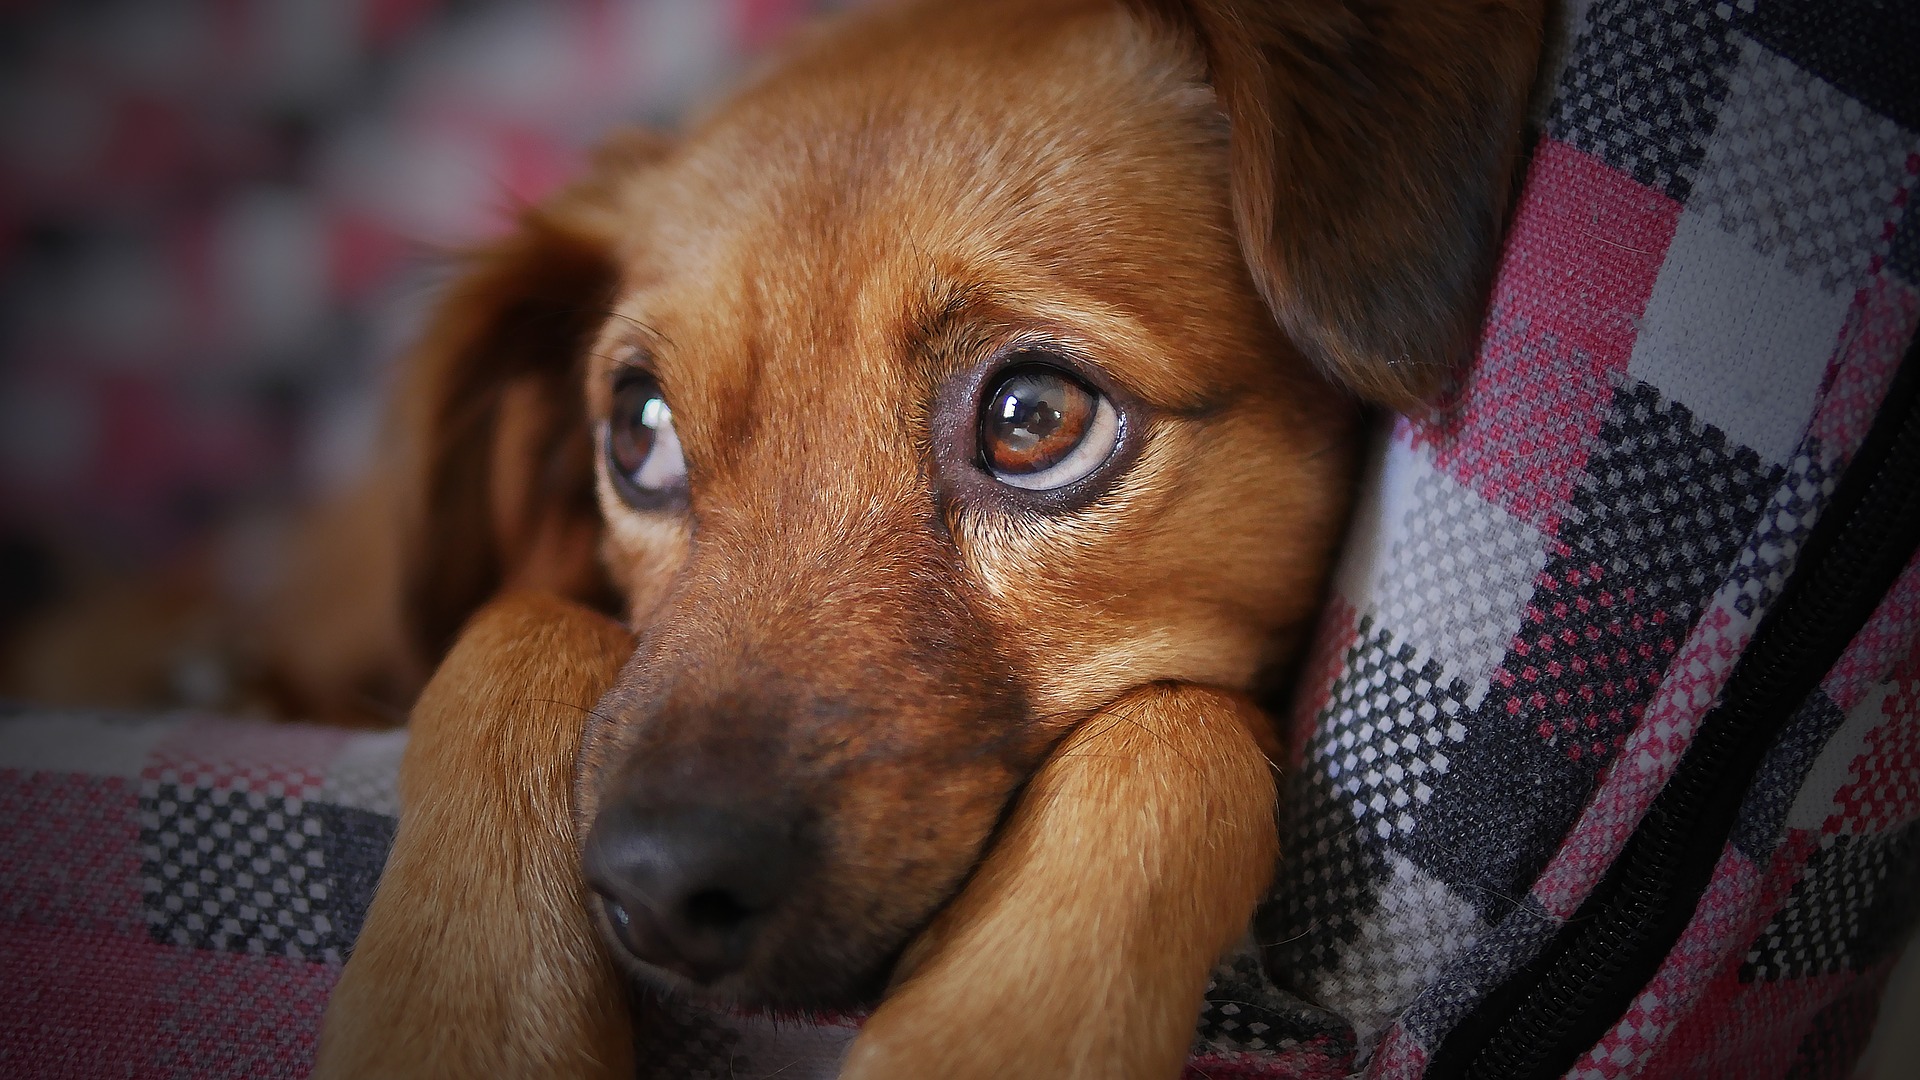 feeding tubes in cats and dogs - brown dog with sad eyes lying on couch under a blanket